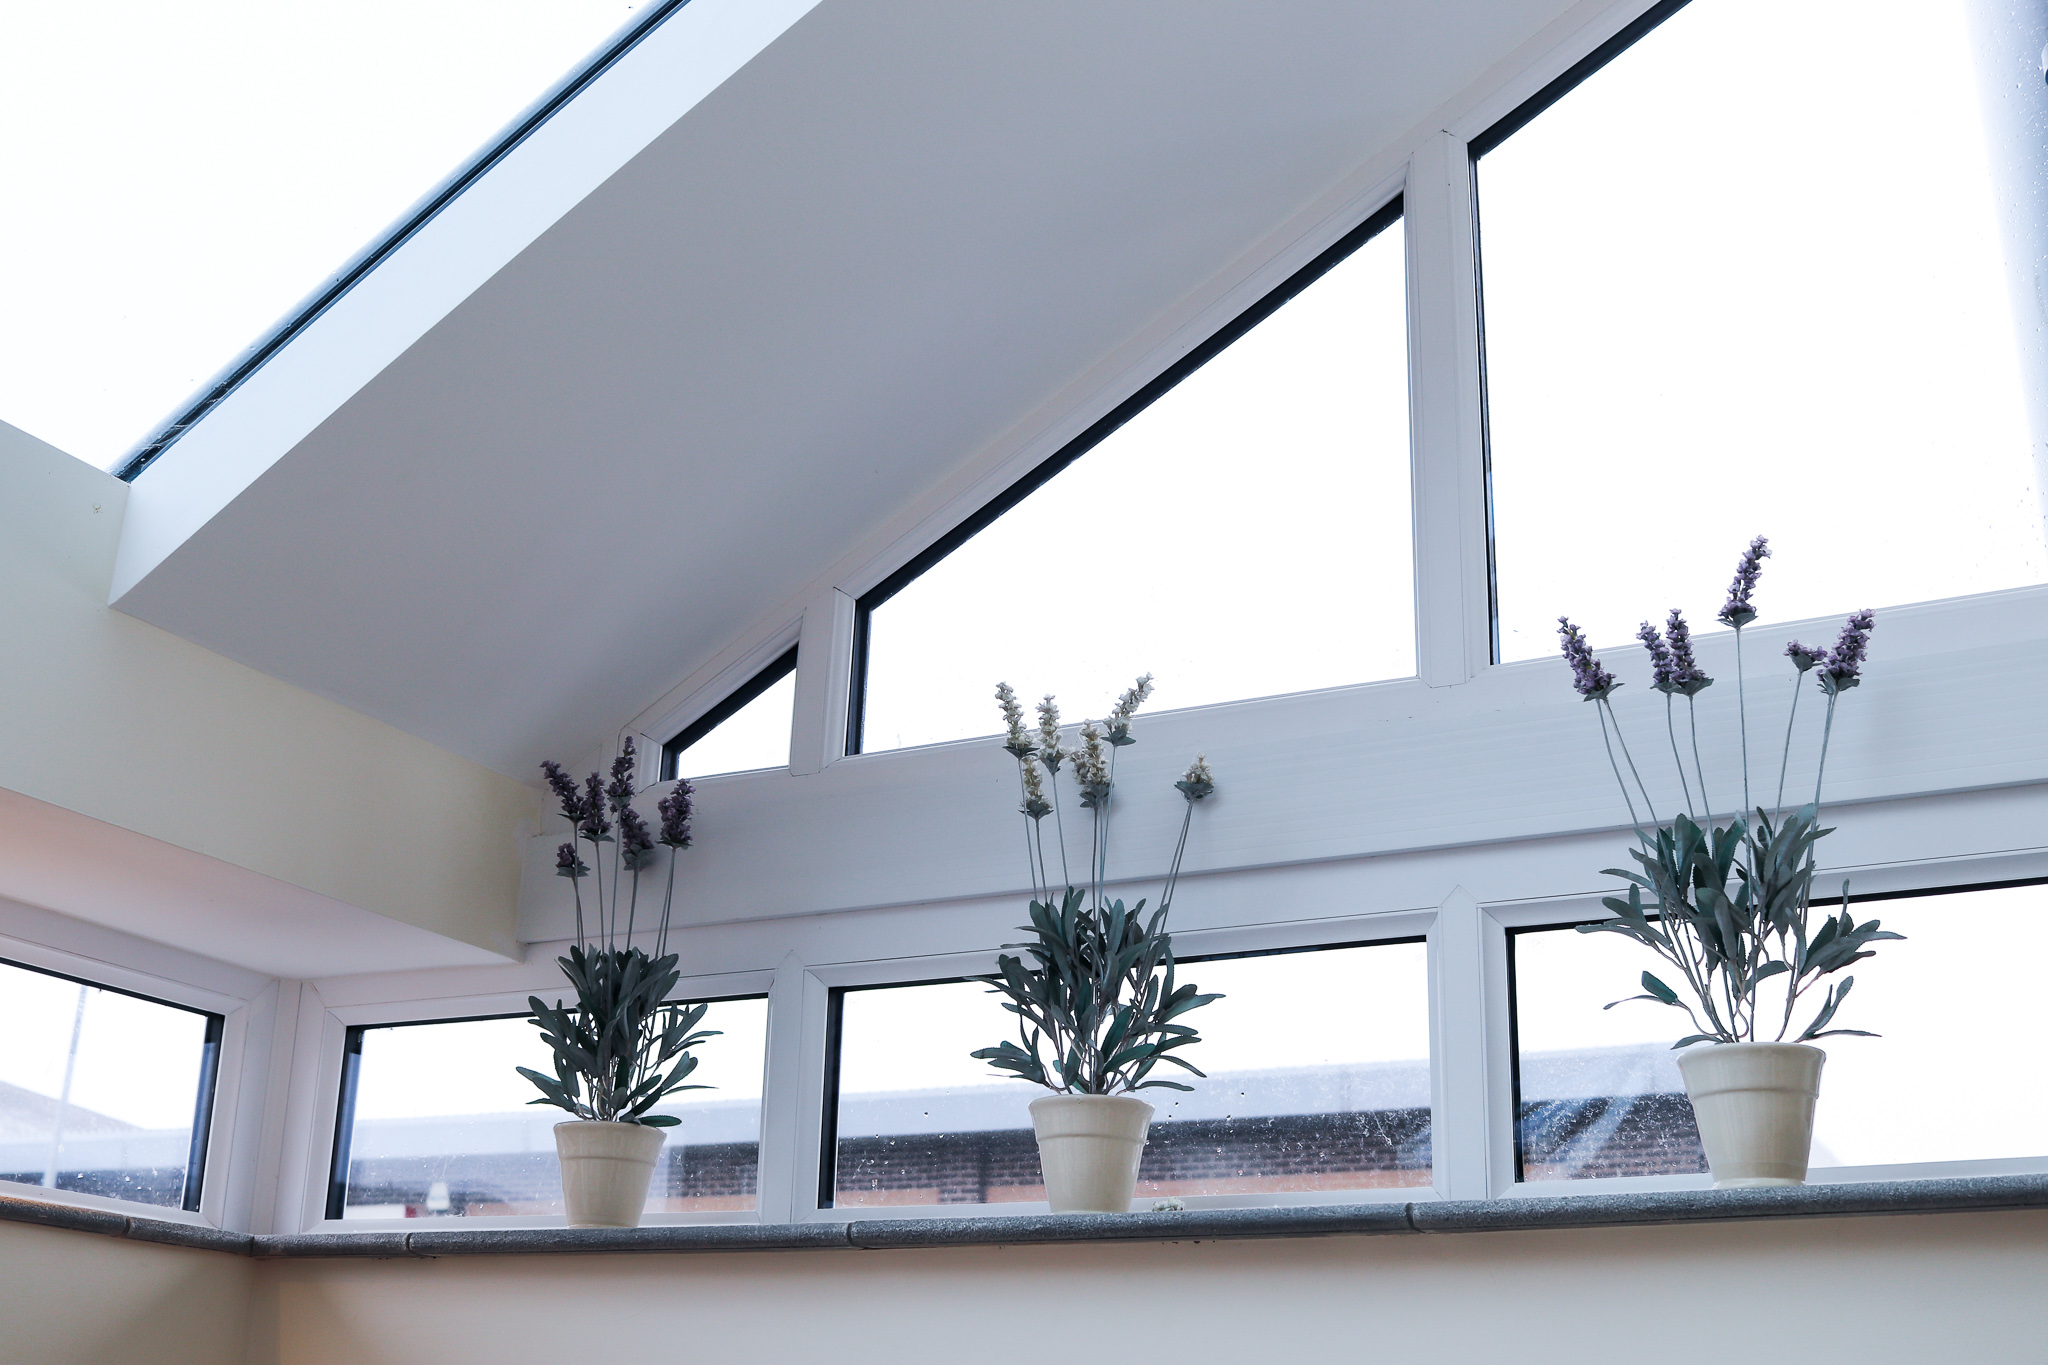 Image of flower pots on top of new window installation.